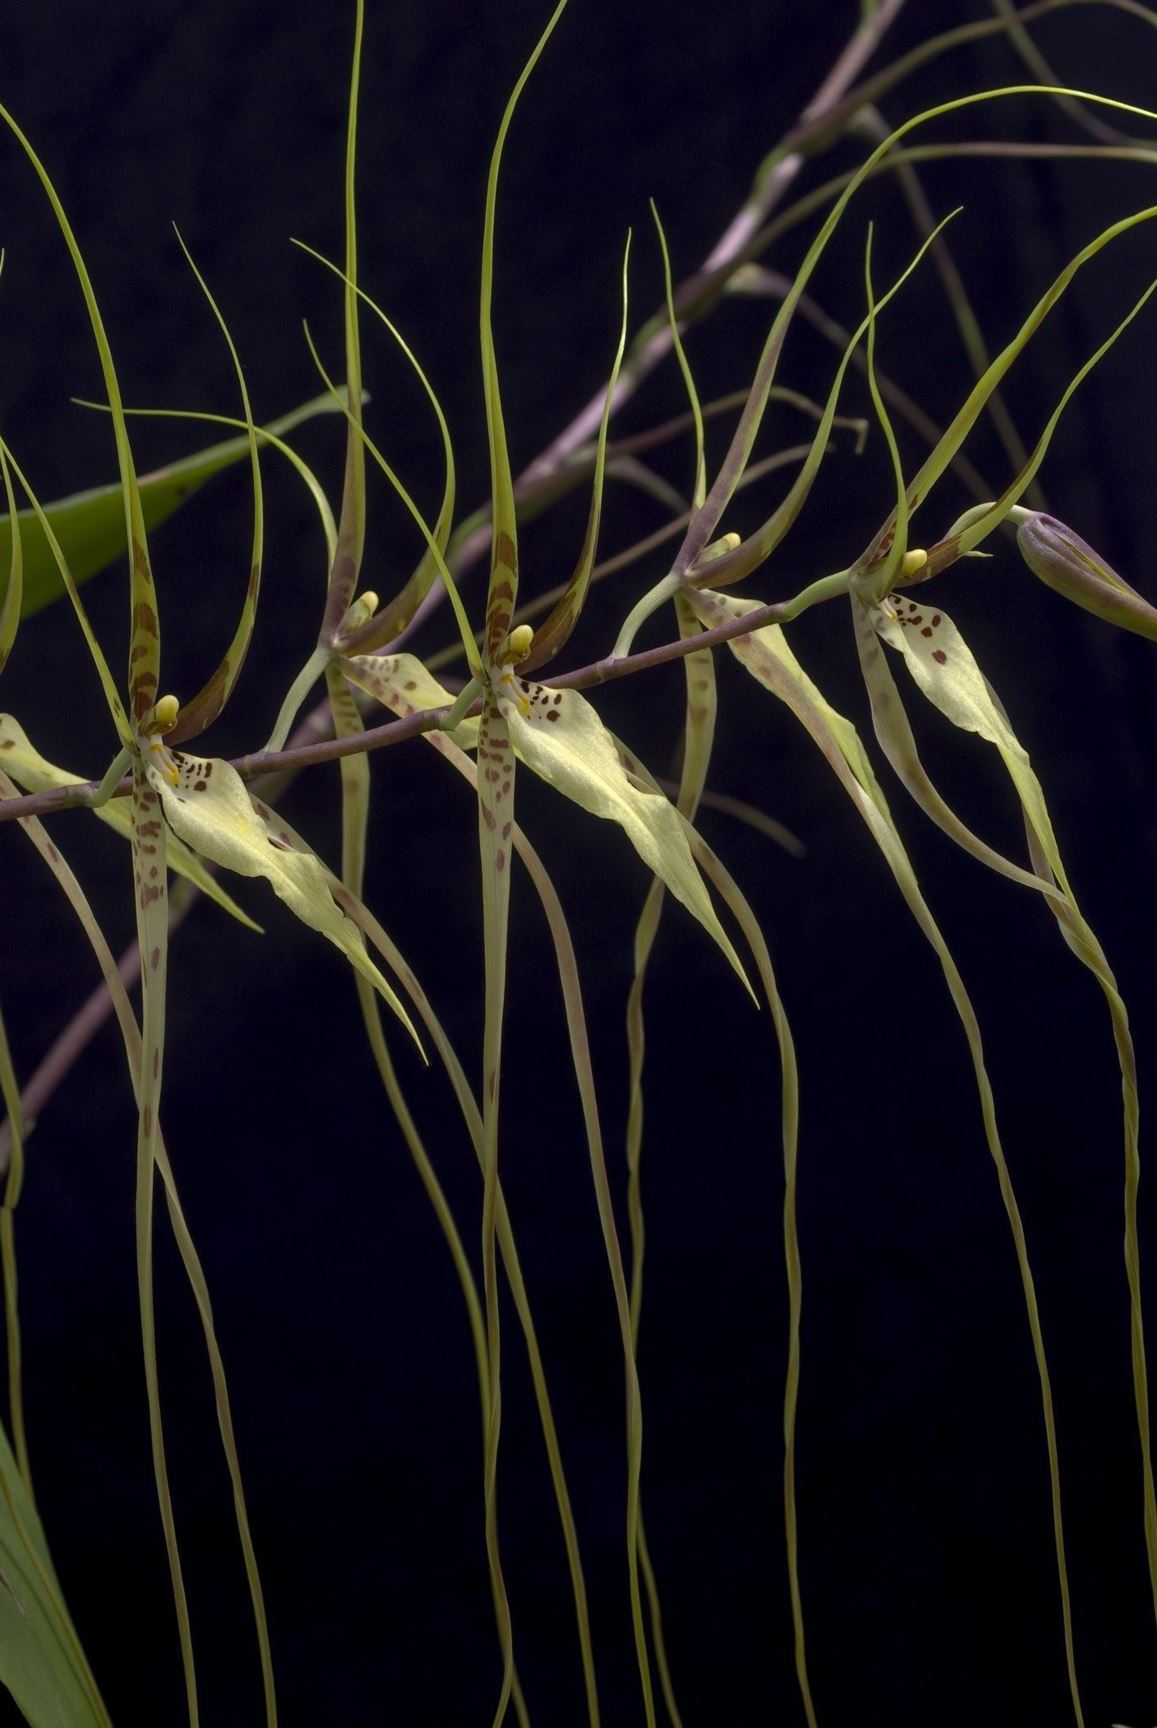 Brassia arcuigera - Arching Spider Orchid, The Arching Brassia